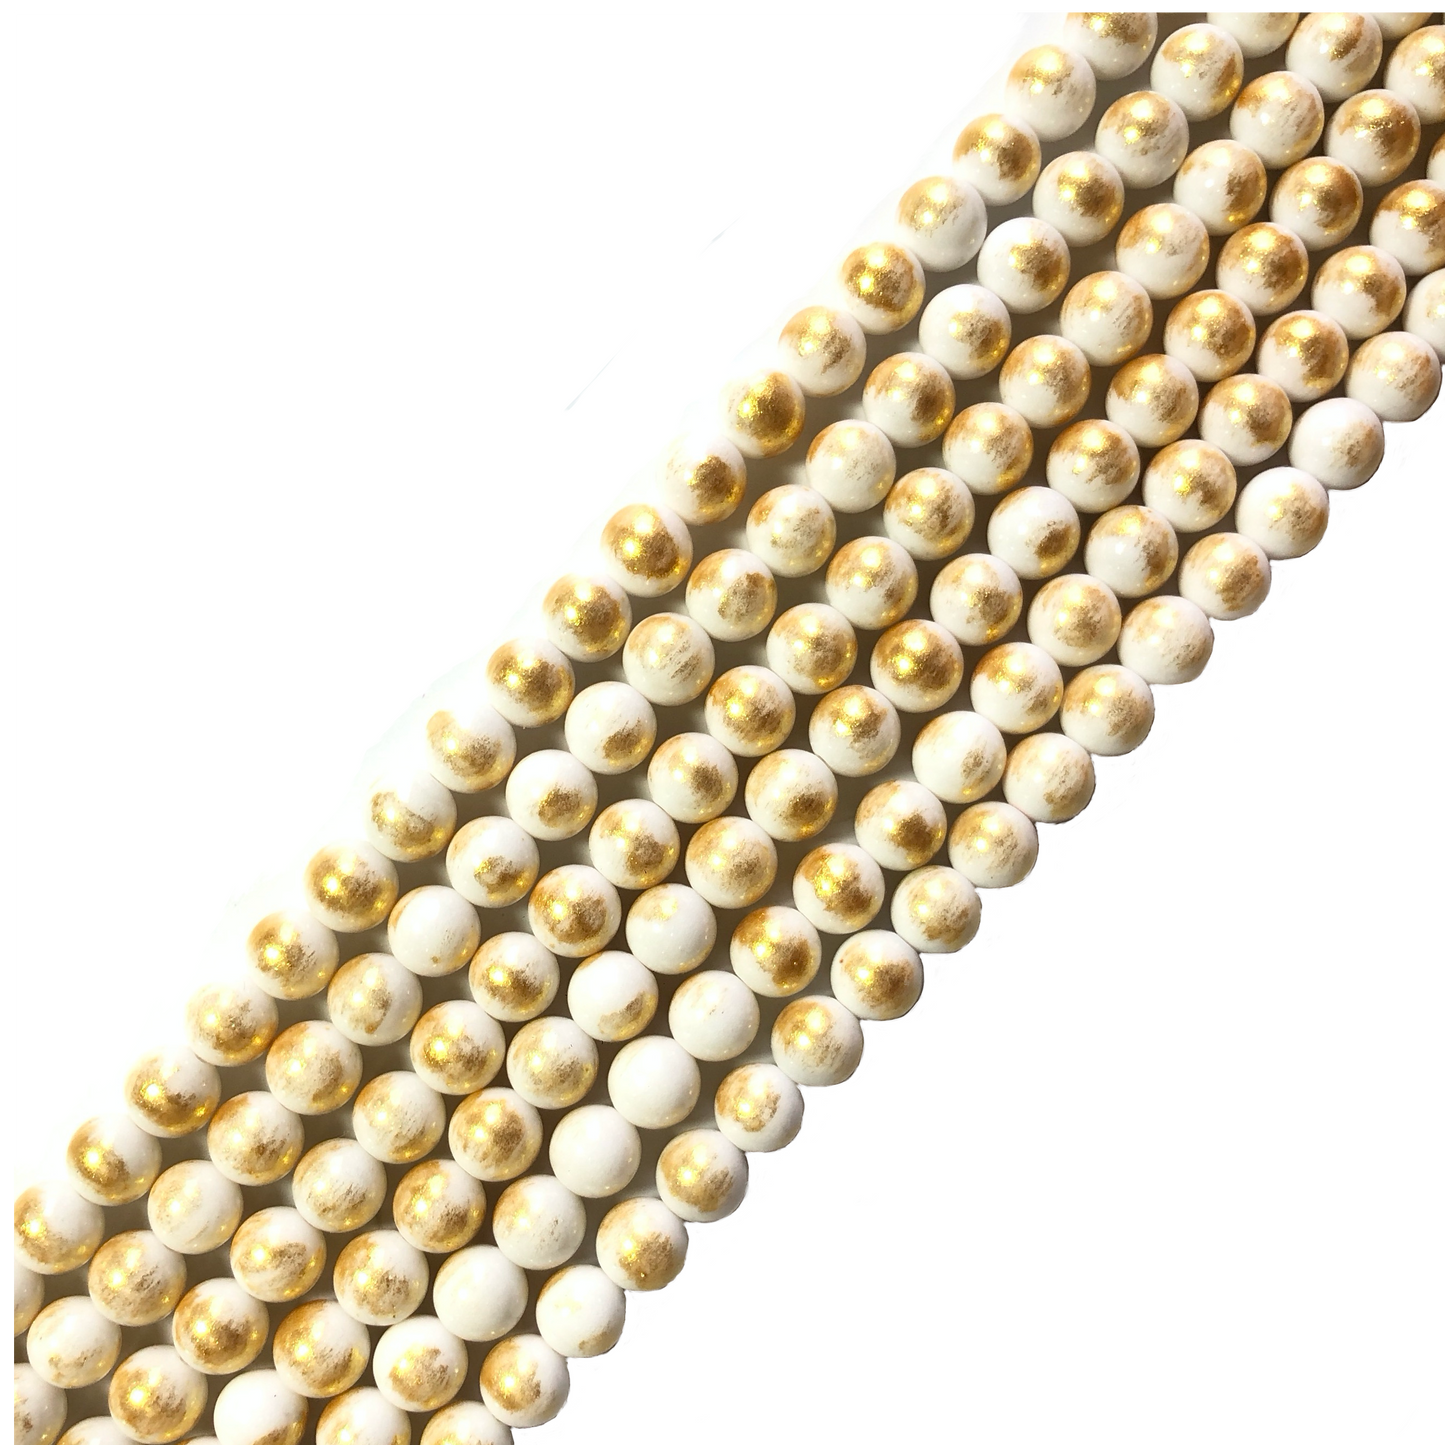 2 Strands/lot 8mm, 10mm White Gold Plated Jade Round Stone Beads Stone Beads 8mm Stone Beads Gold Plated Jade Beads Round Jade Beads Charms Beads Beyond